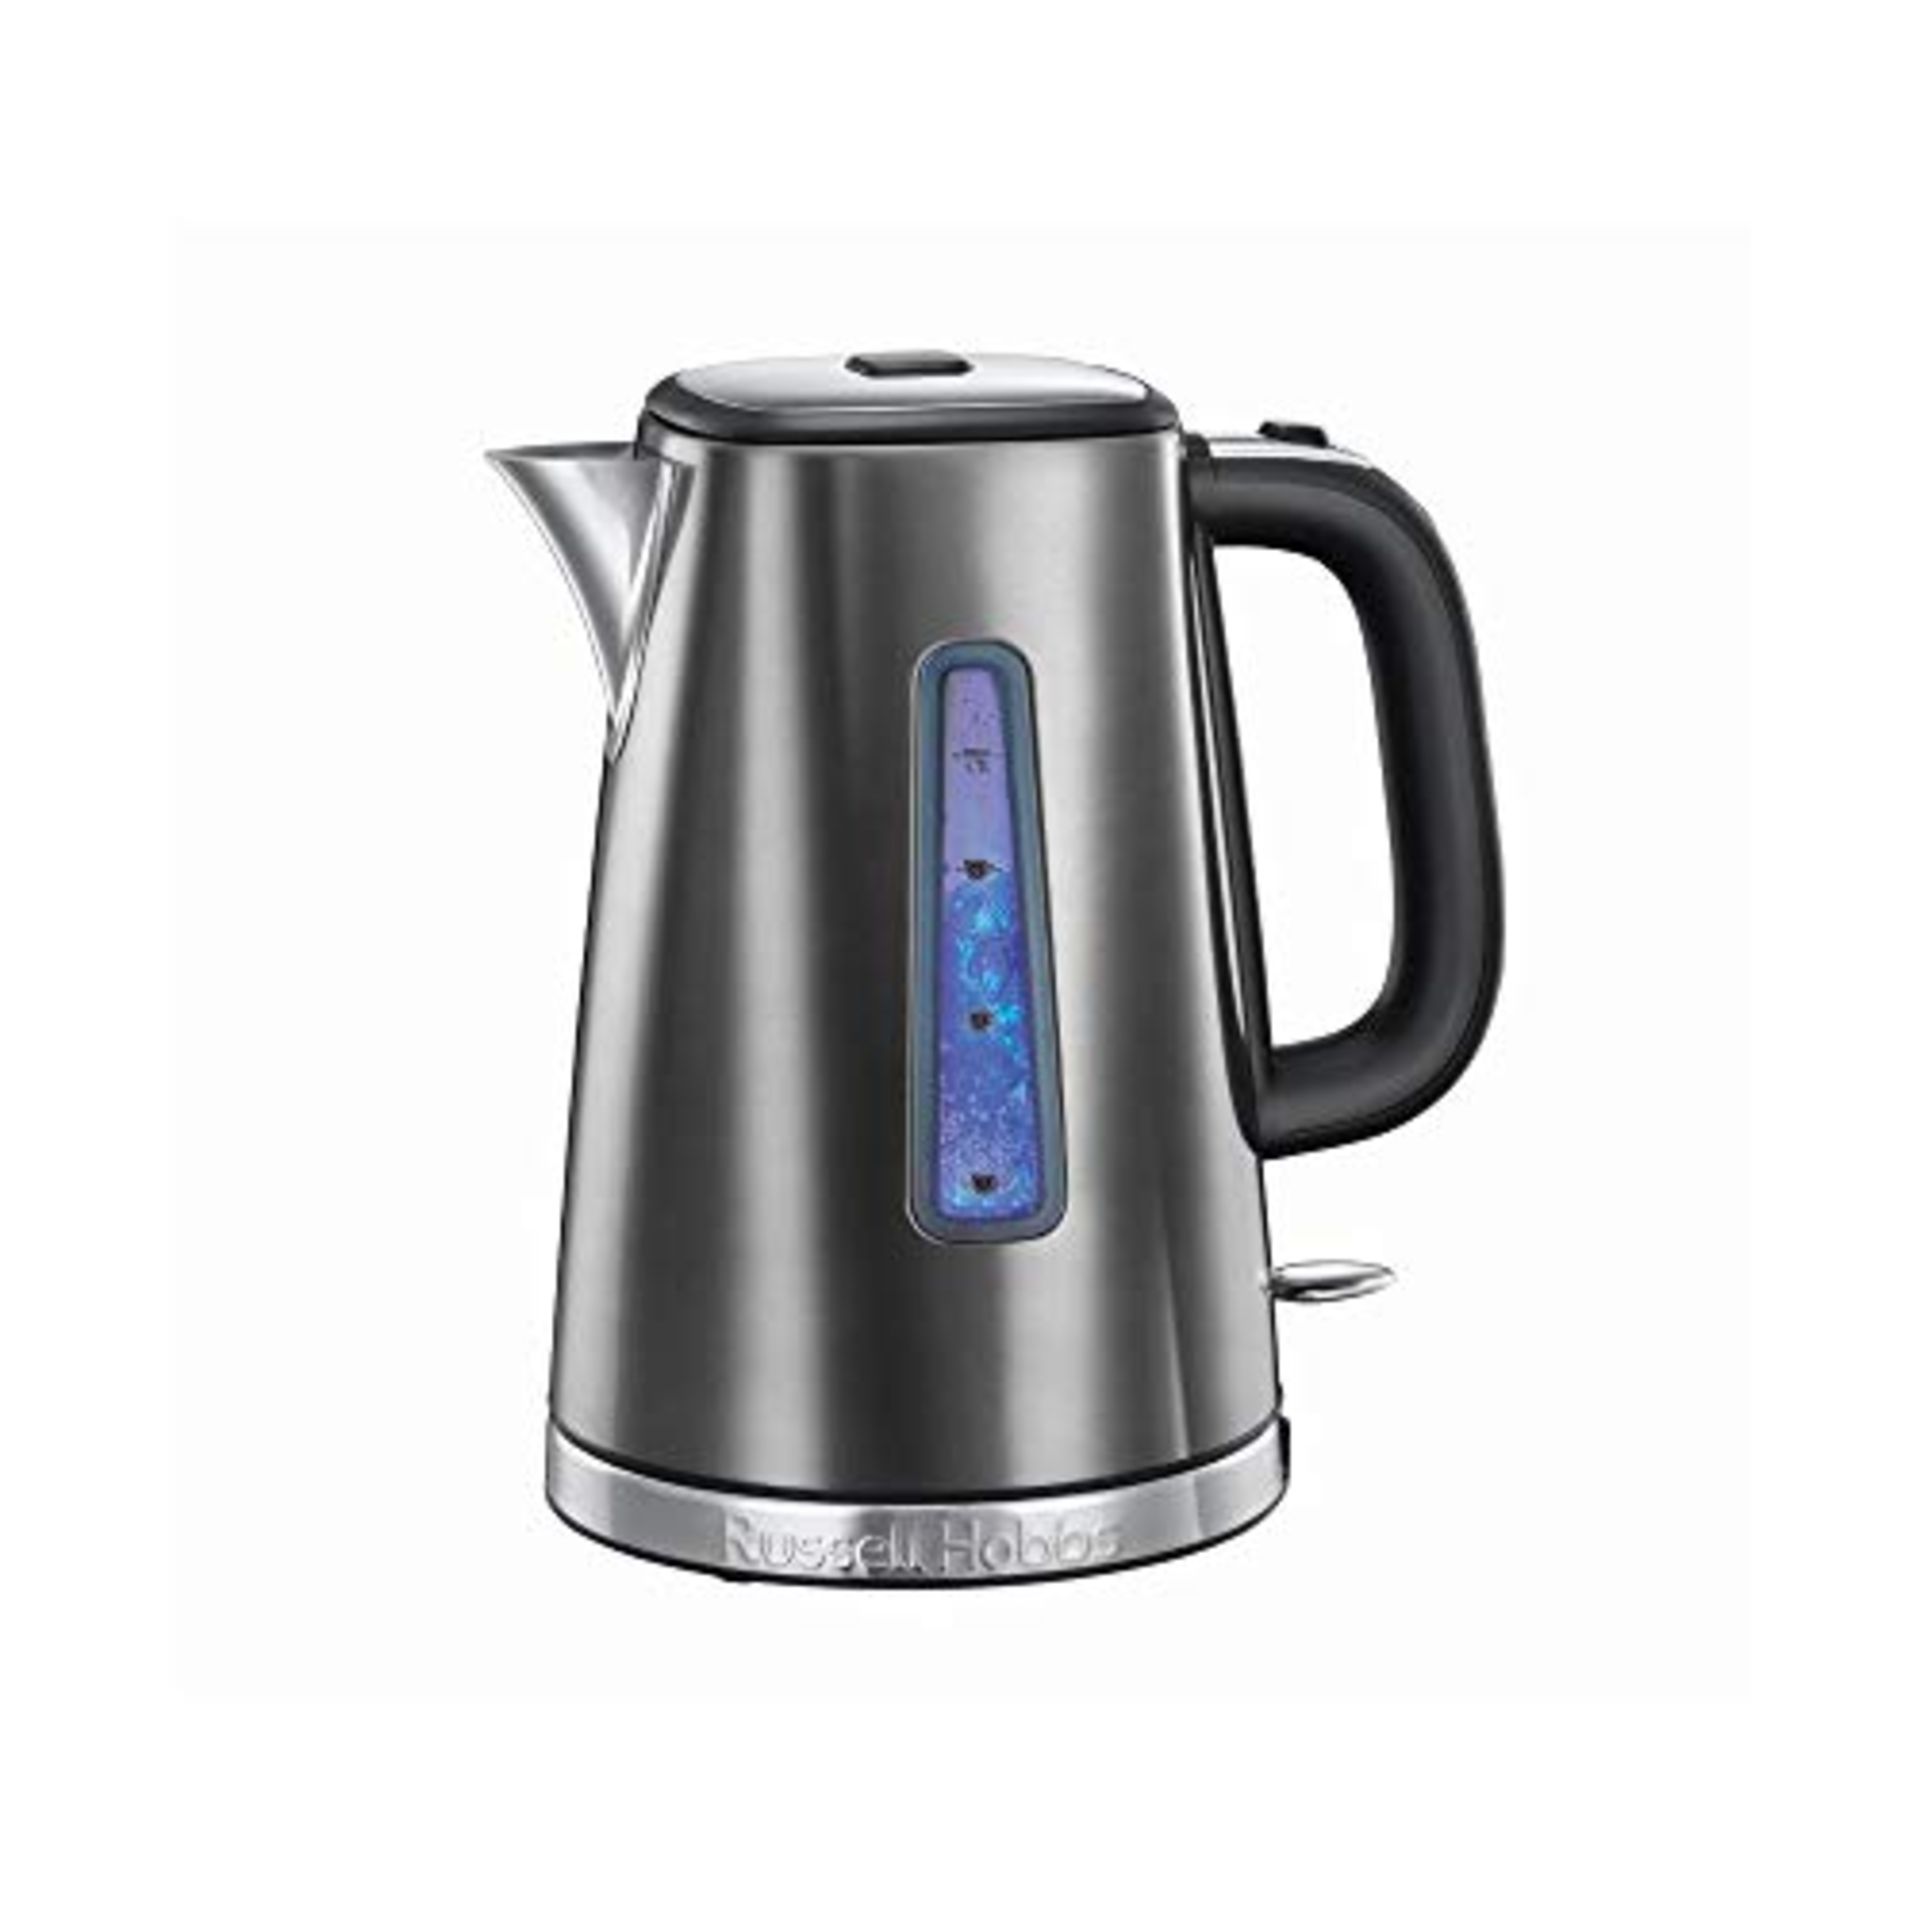 Russell Hobbs 23211 Luna Quiet Boil Electric Kettle, Stainless Steel, 3000 W, 1.7 Litr